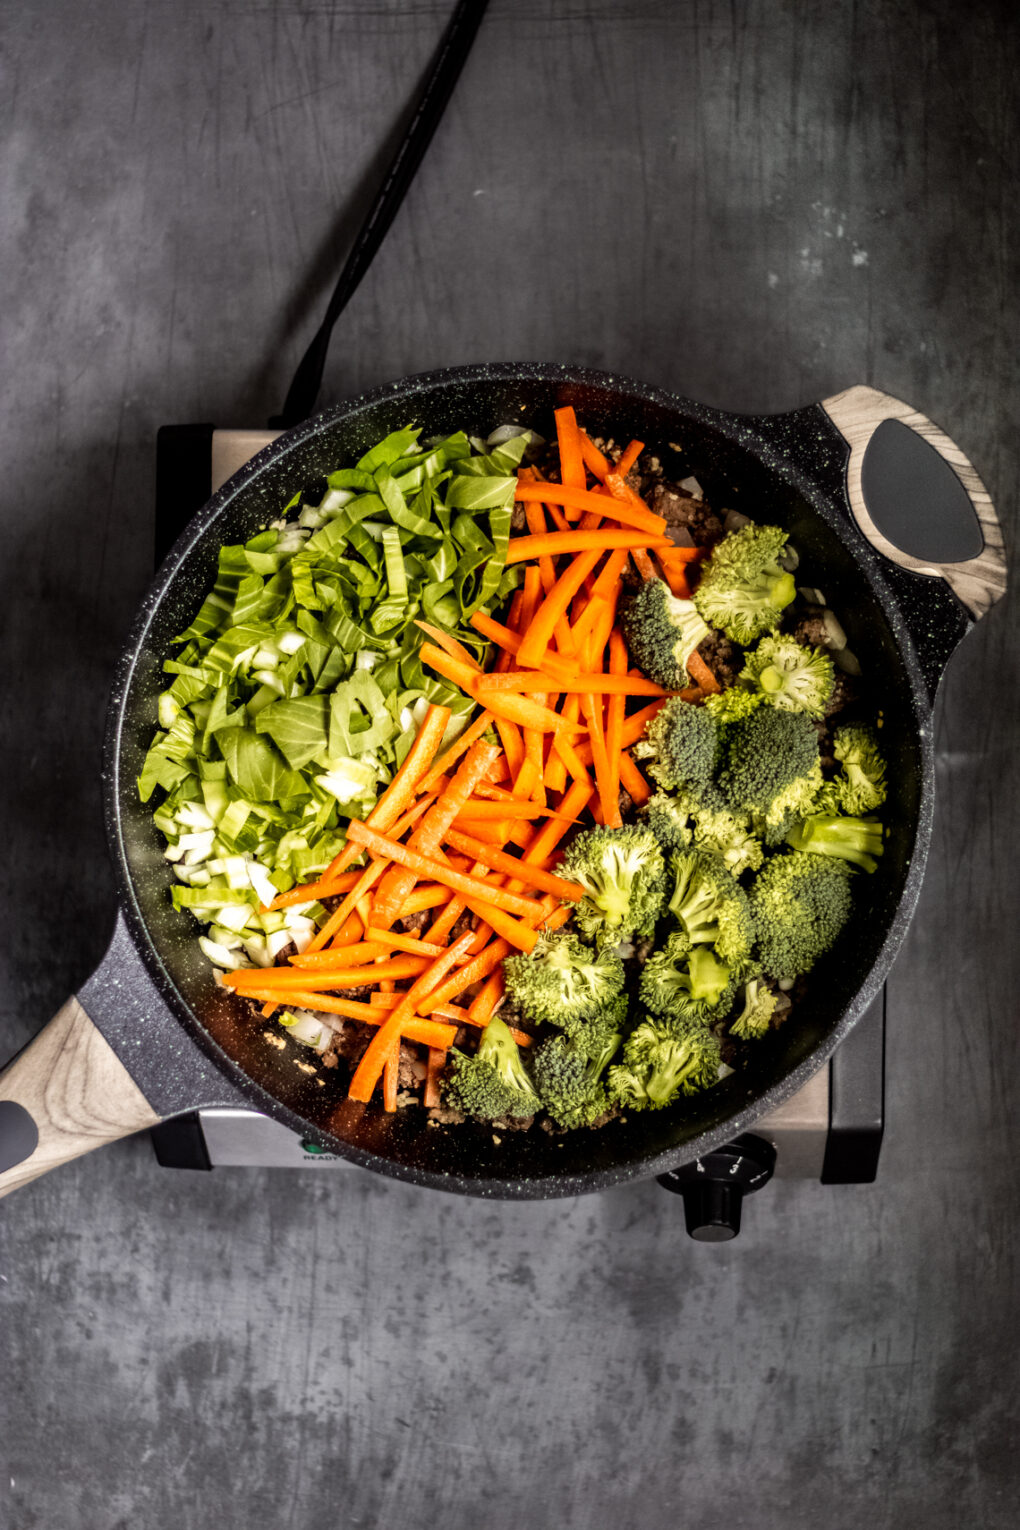 vegetables in a skillet including broccoli, carrots, and green onions